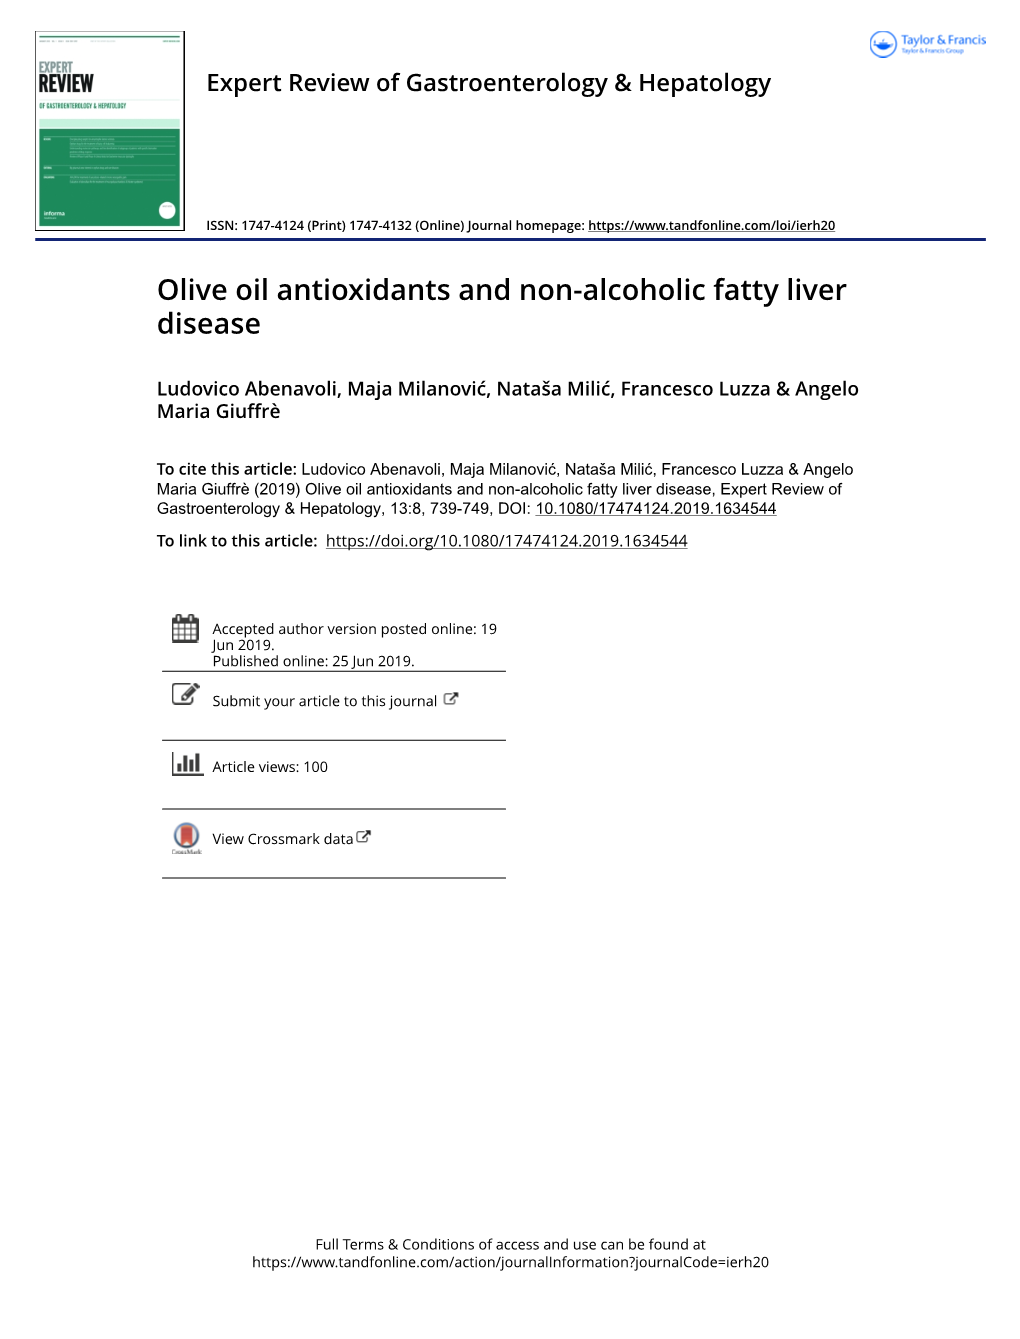 Olive Oil Antioxidants and Non-Alcoholic Fatty Liver Disease